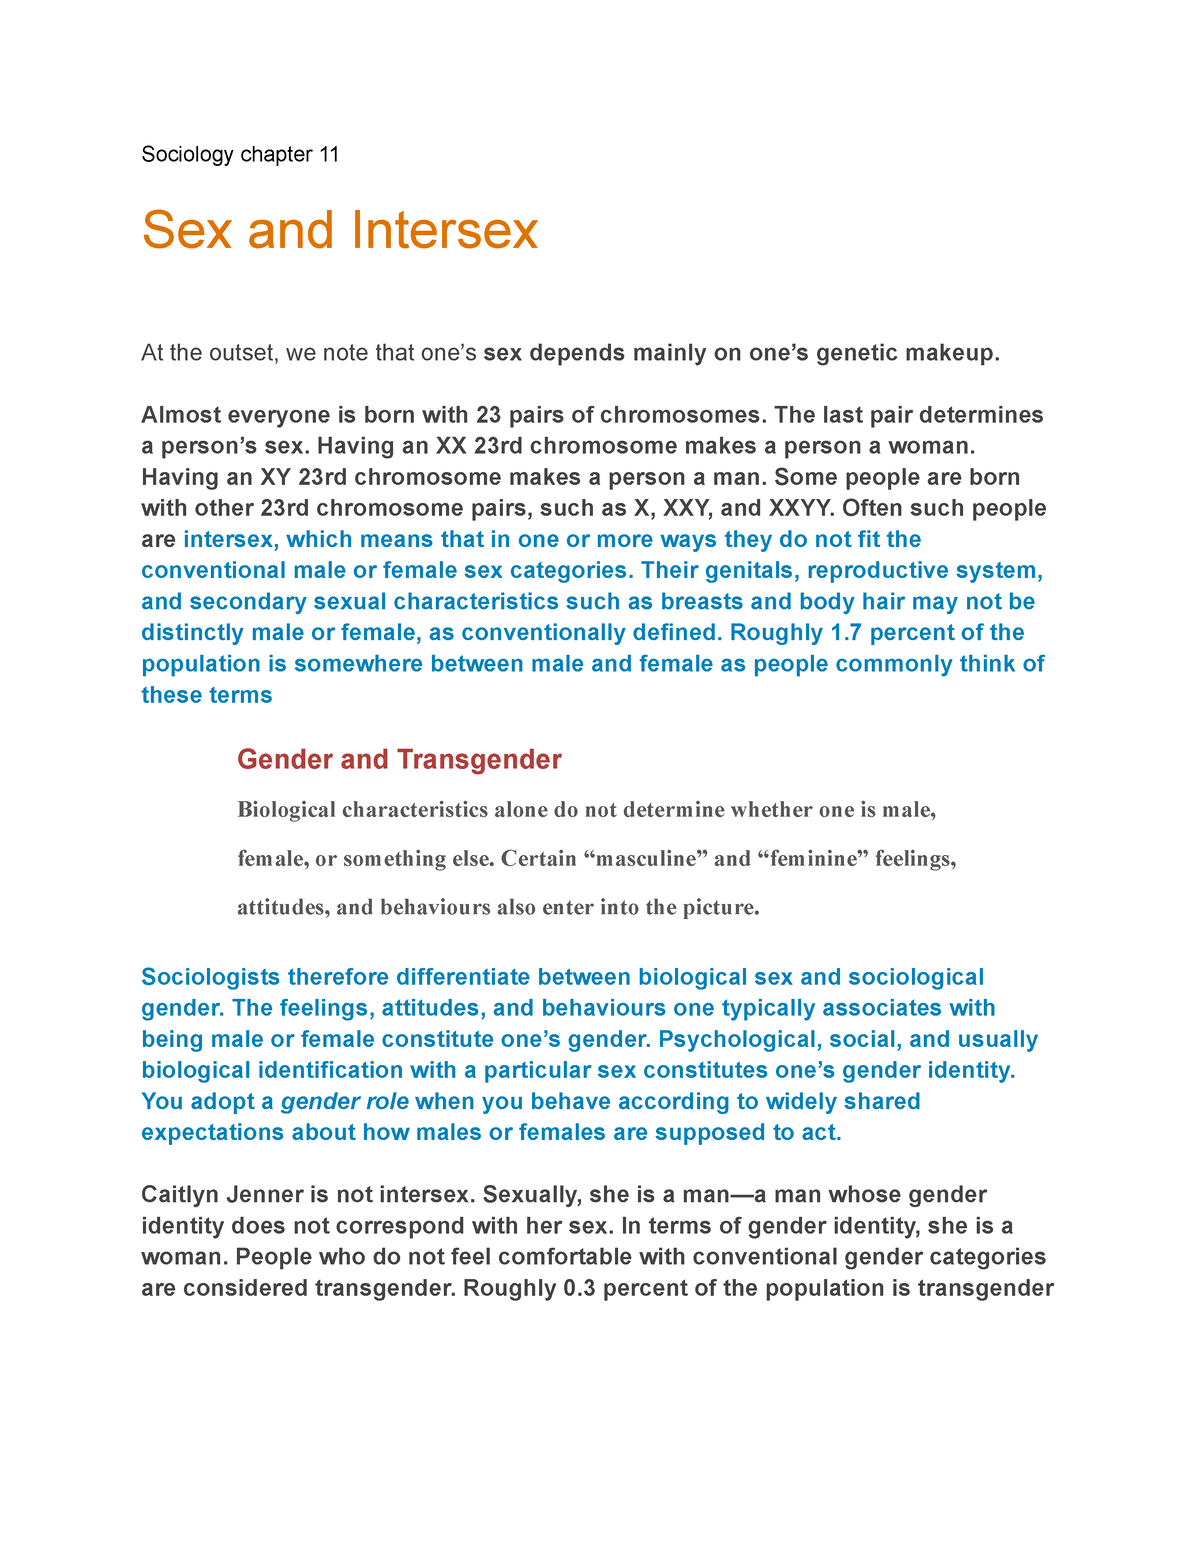 Sociology Chapter 11 Lecture Sociology Chapter 11 Sex And Intersex At The Outset We Note